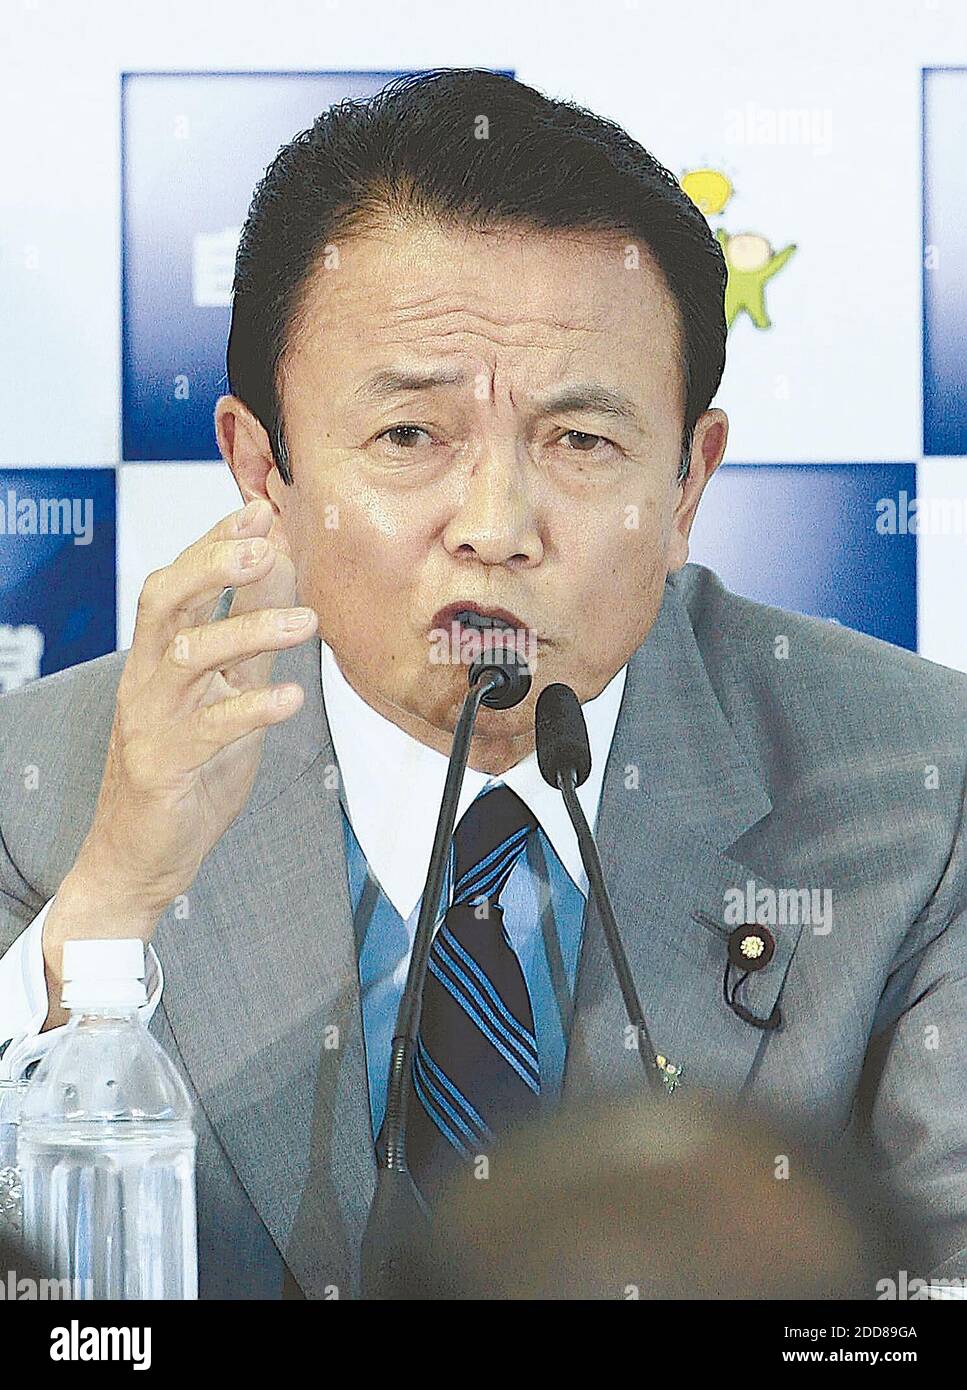 NO FILM, NO VIDEO, NO TV, NO DOCUMENTARY - File picture dated September 11, 2008 of Liberal Democratic Party President Taro Aso who was elected Japan's 59th prime minister in an extraordinary Diet session convened in Tokyo, Japan on Wednesday, September 24, 2008. Photo by Yomiuri Shimbun/MCT/ABACAPRESS.COM Stock Photo